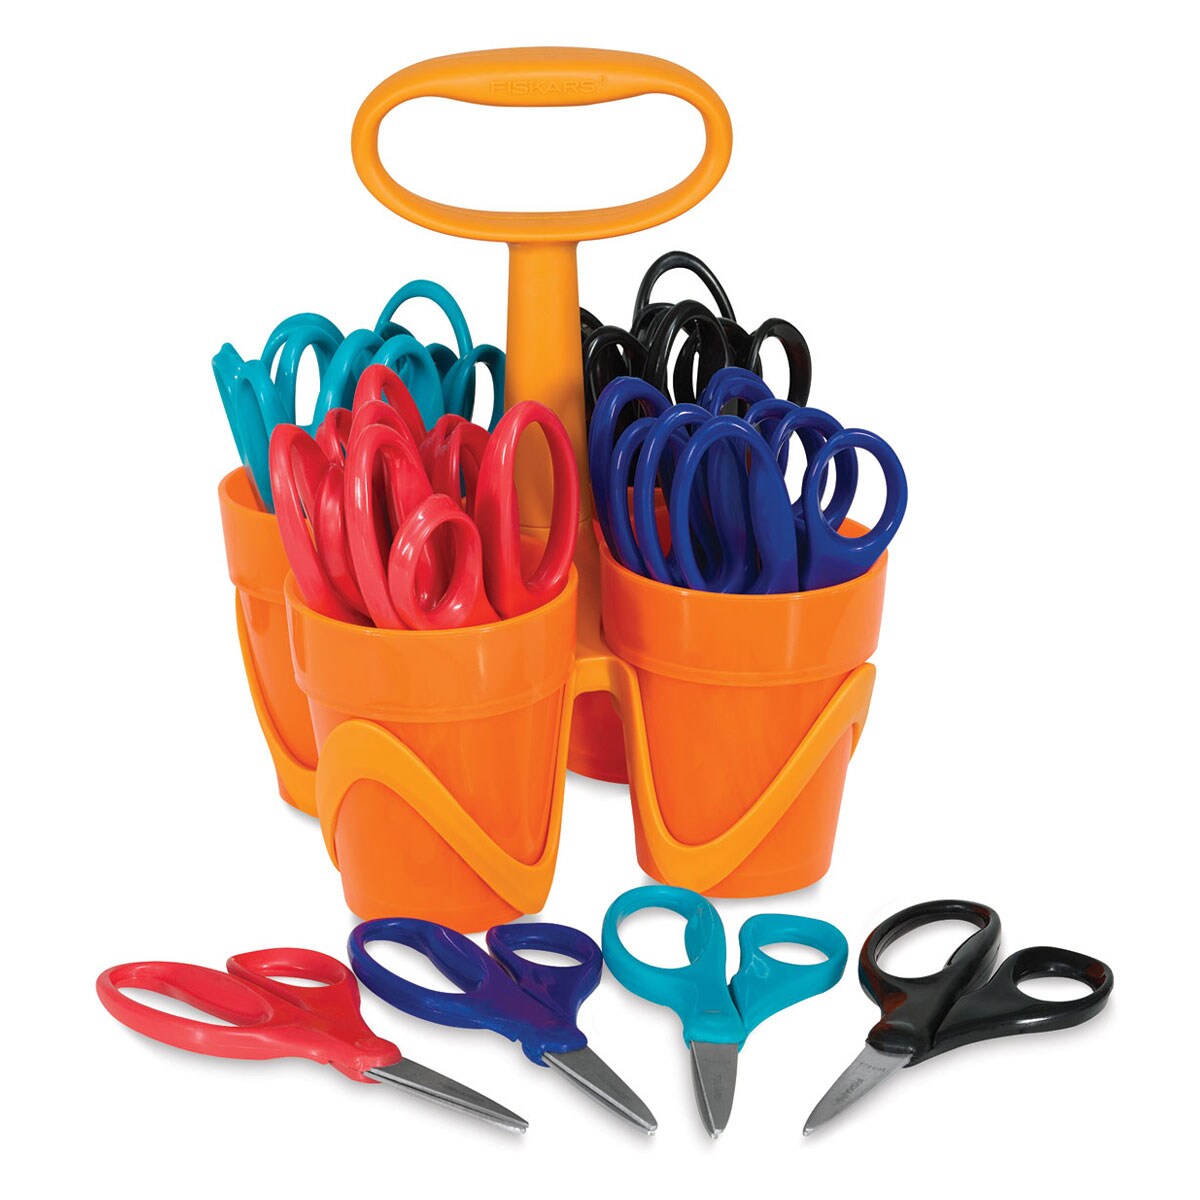 Fiskars Kids Scissors - Pkg of 24 with Caddy, Pointed